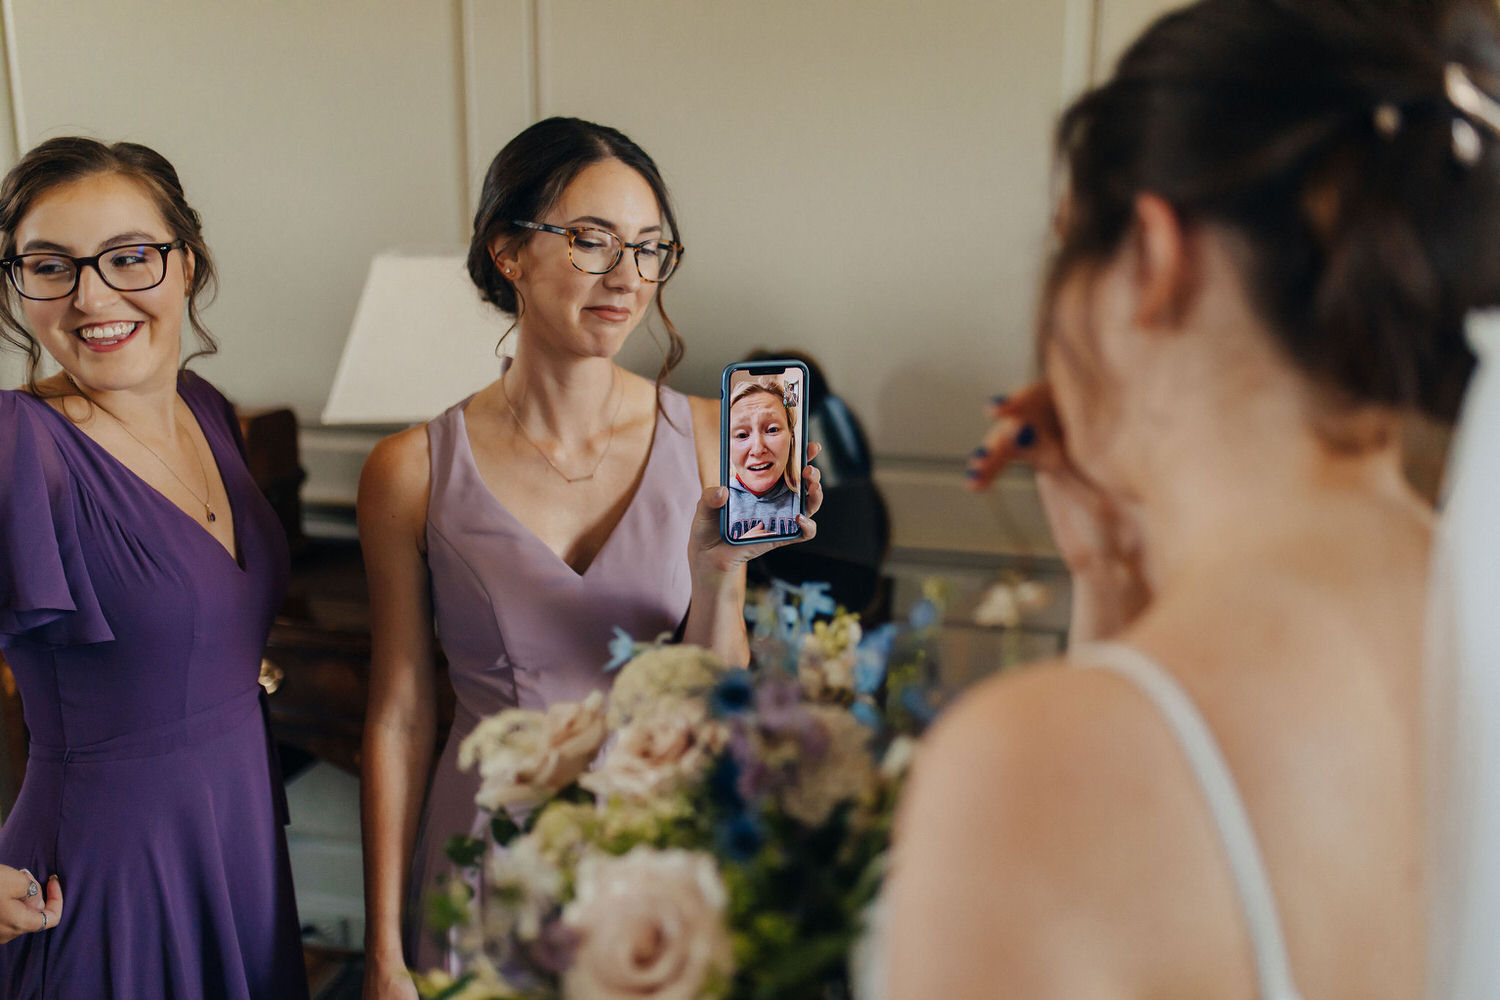 Celebrant facetiming a friend for a first look.